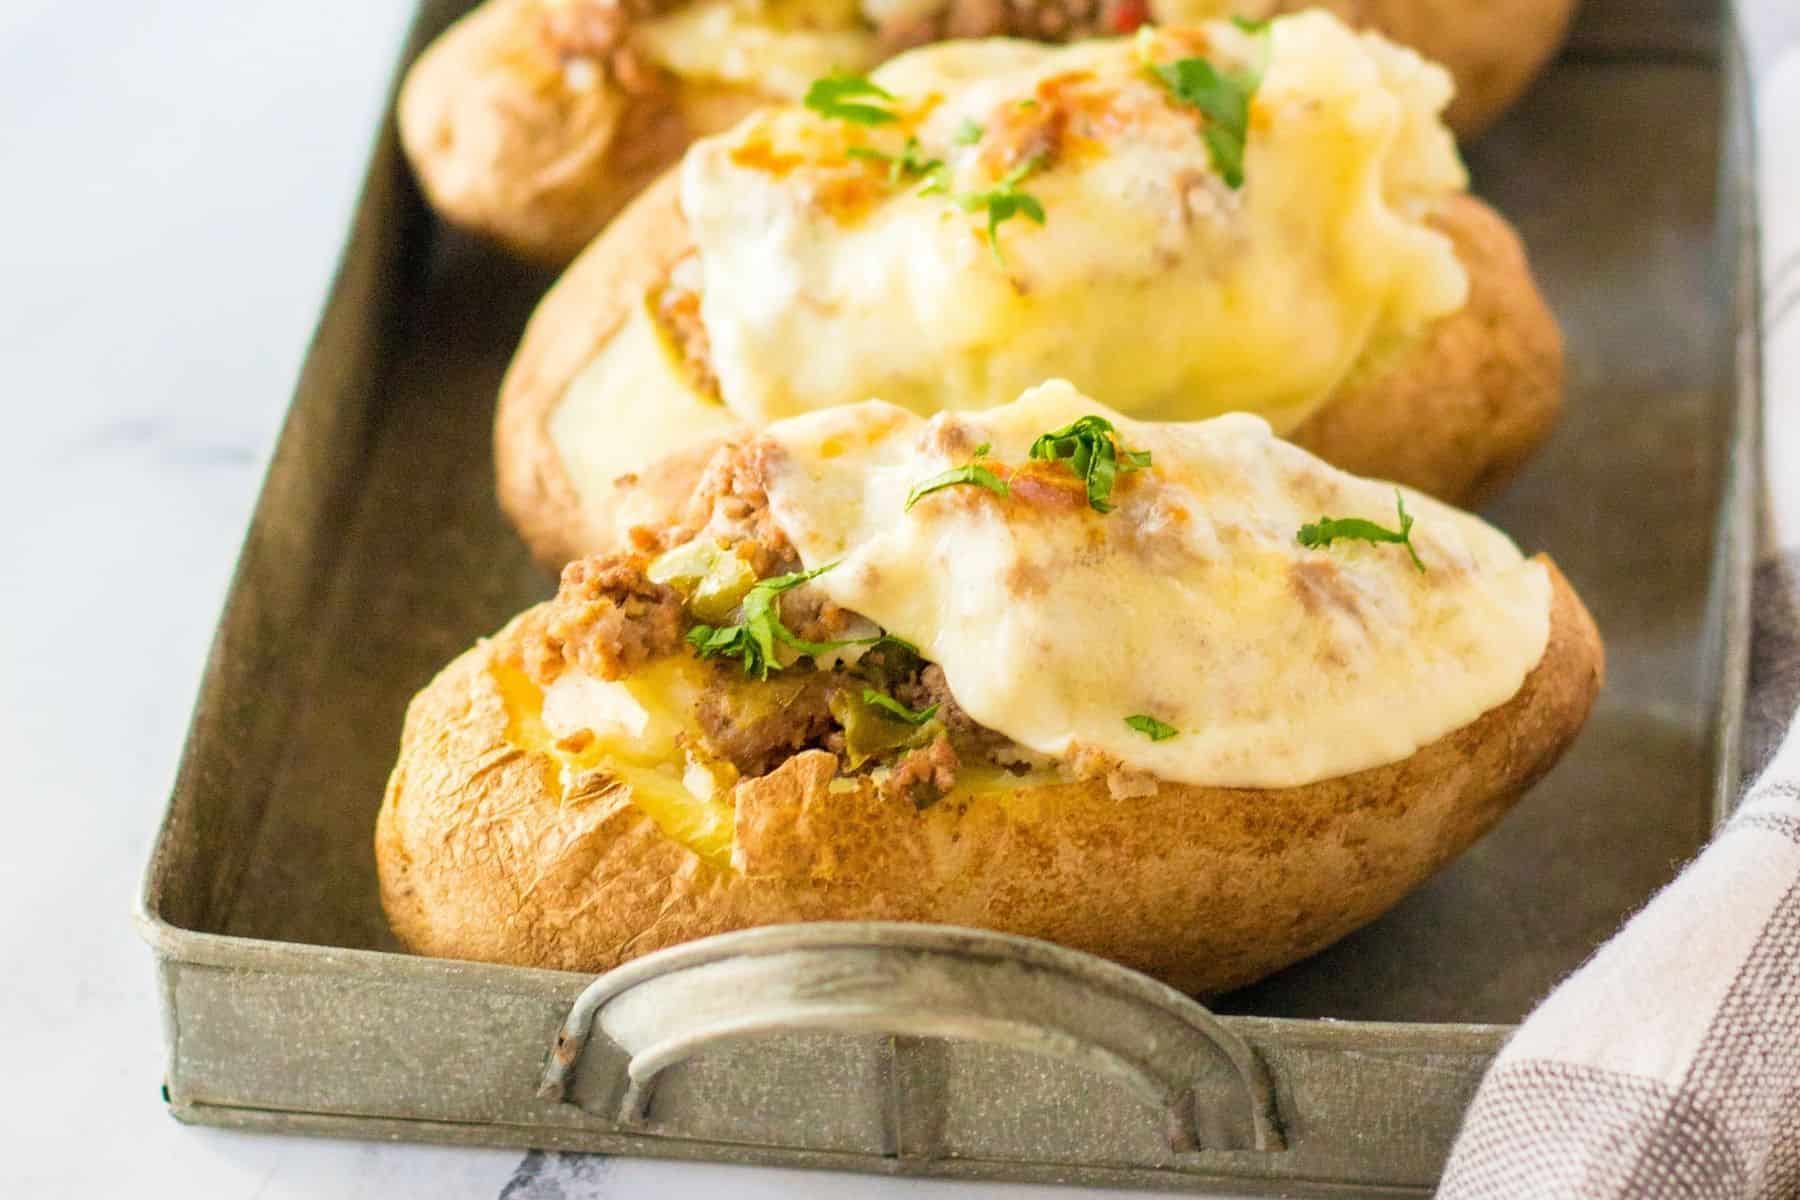 Stuffed baked potatoes on a serving tray with cheese melted on top.